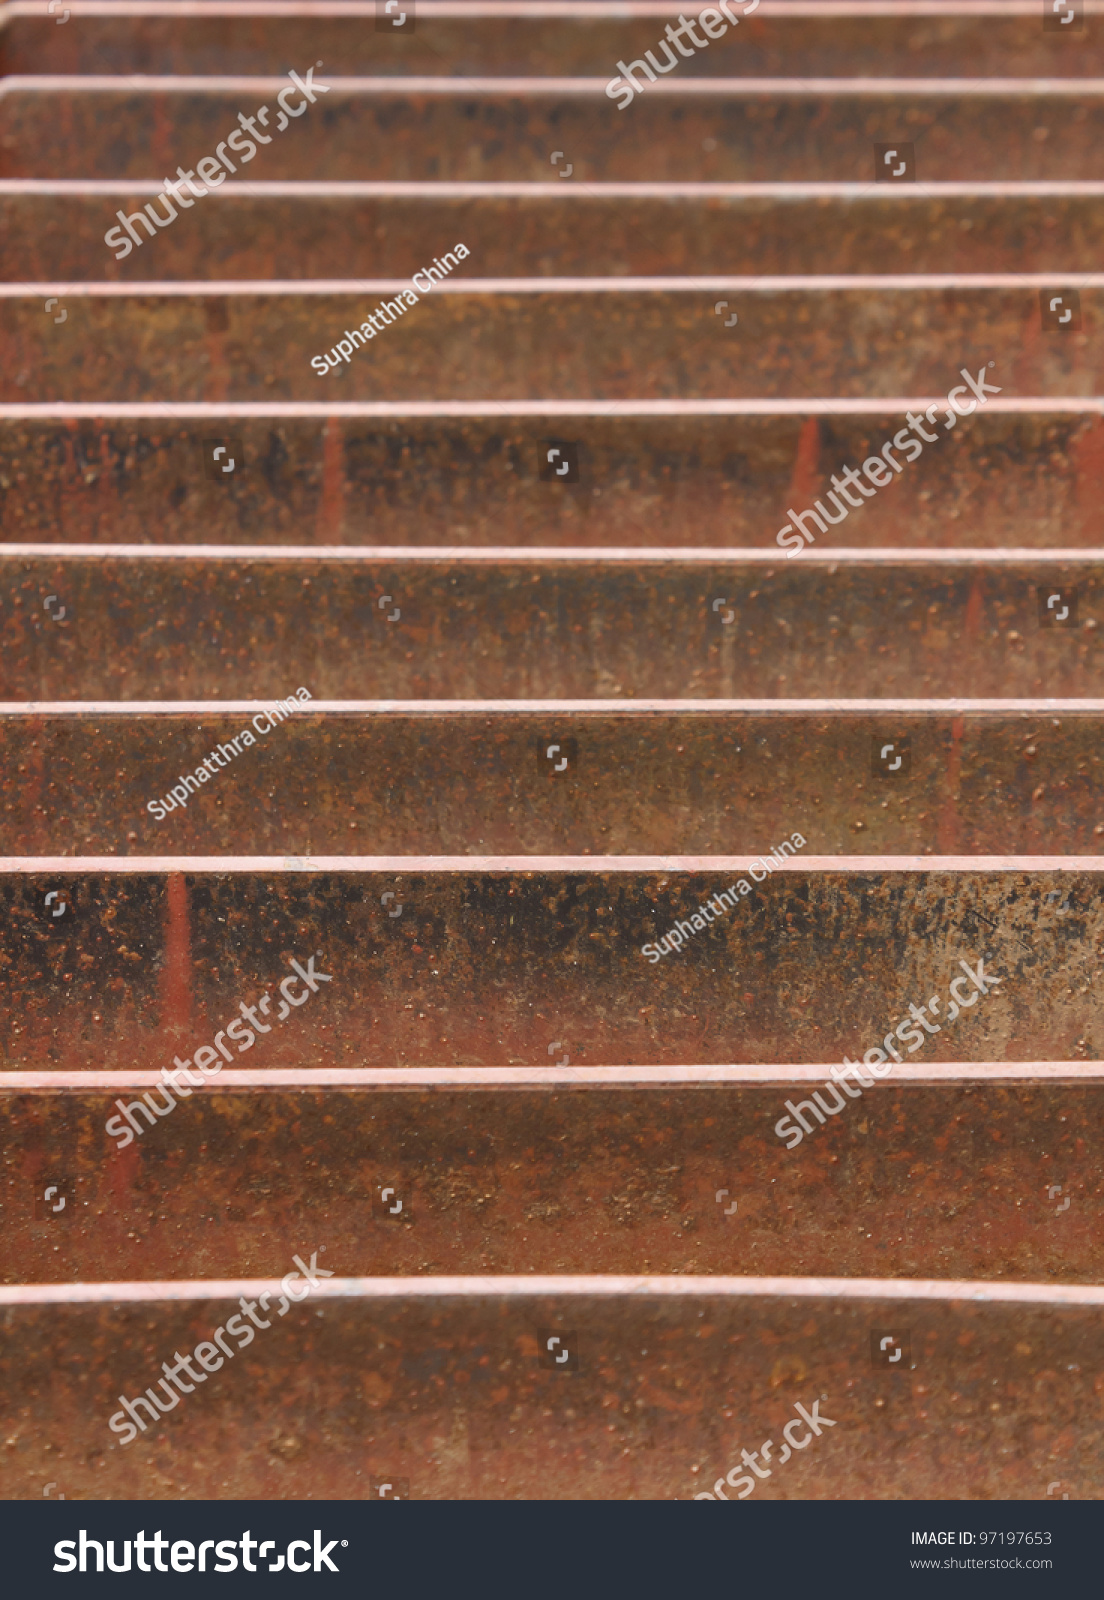 Abstract view of rusted metal storm drain on street #97197653